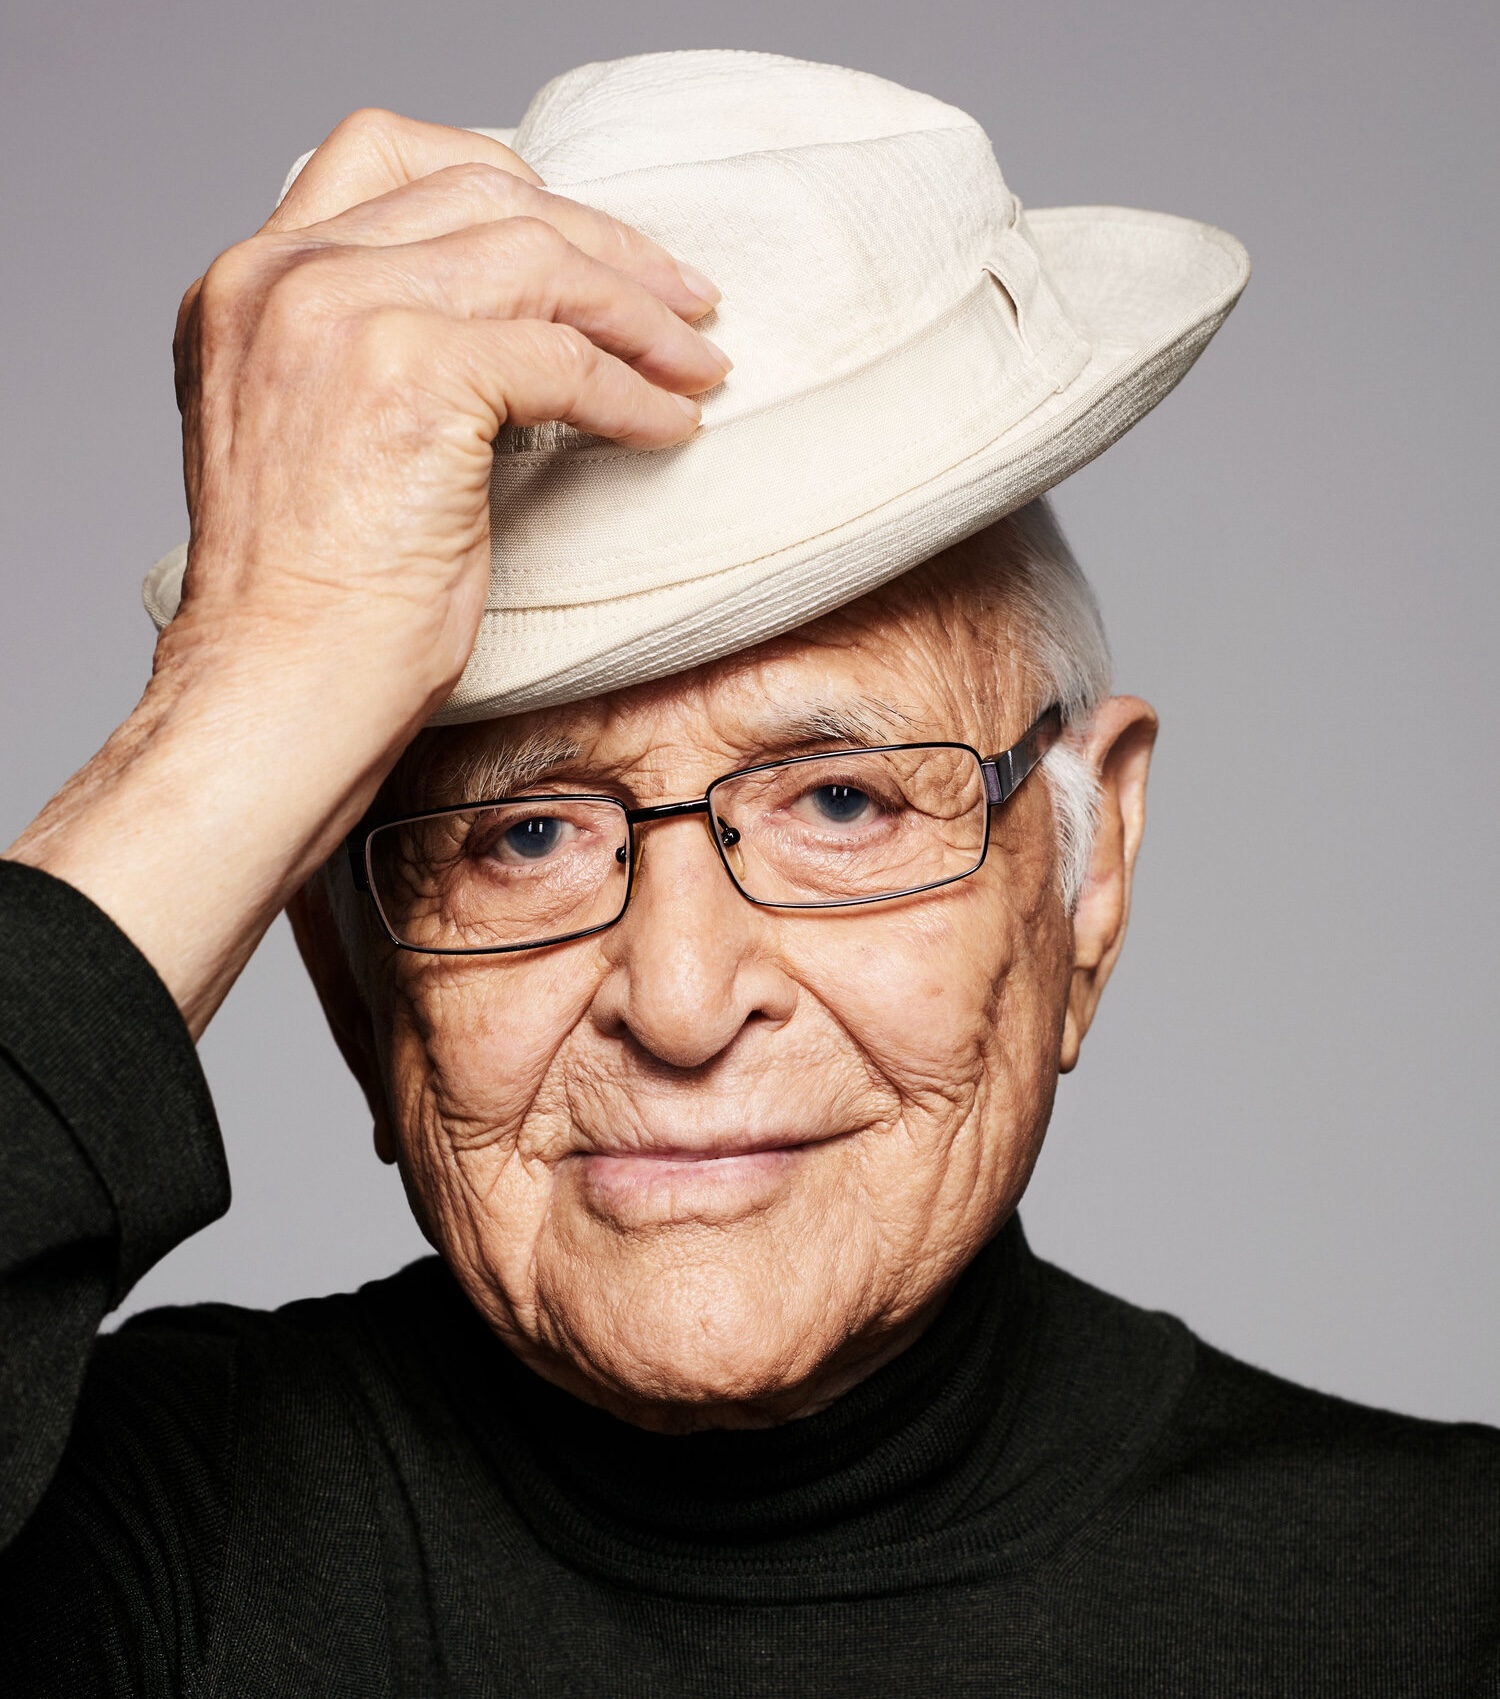  THE WRONG PLACE. NORMAN LEAR GONE  AT AGE 101